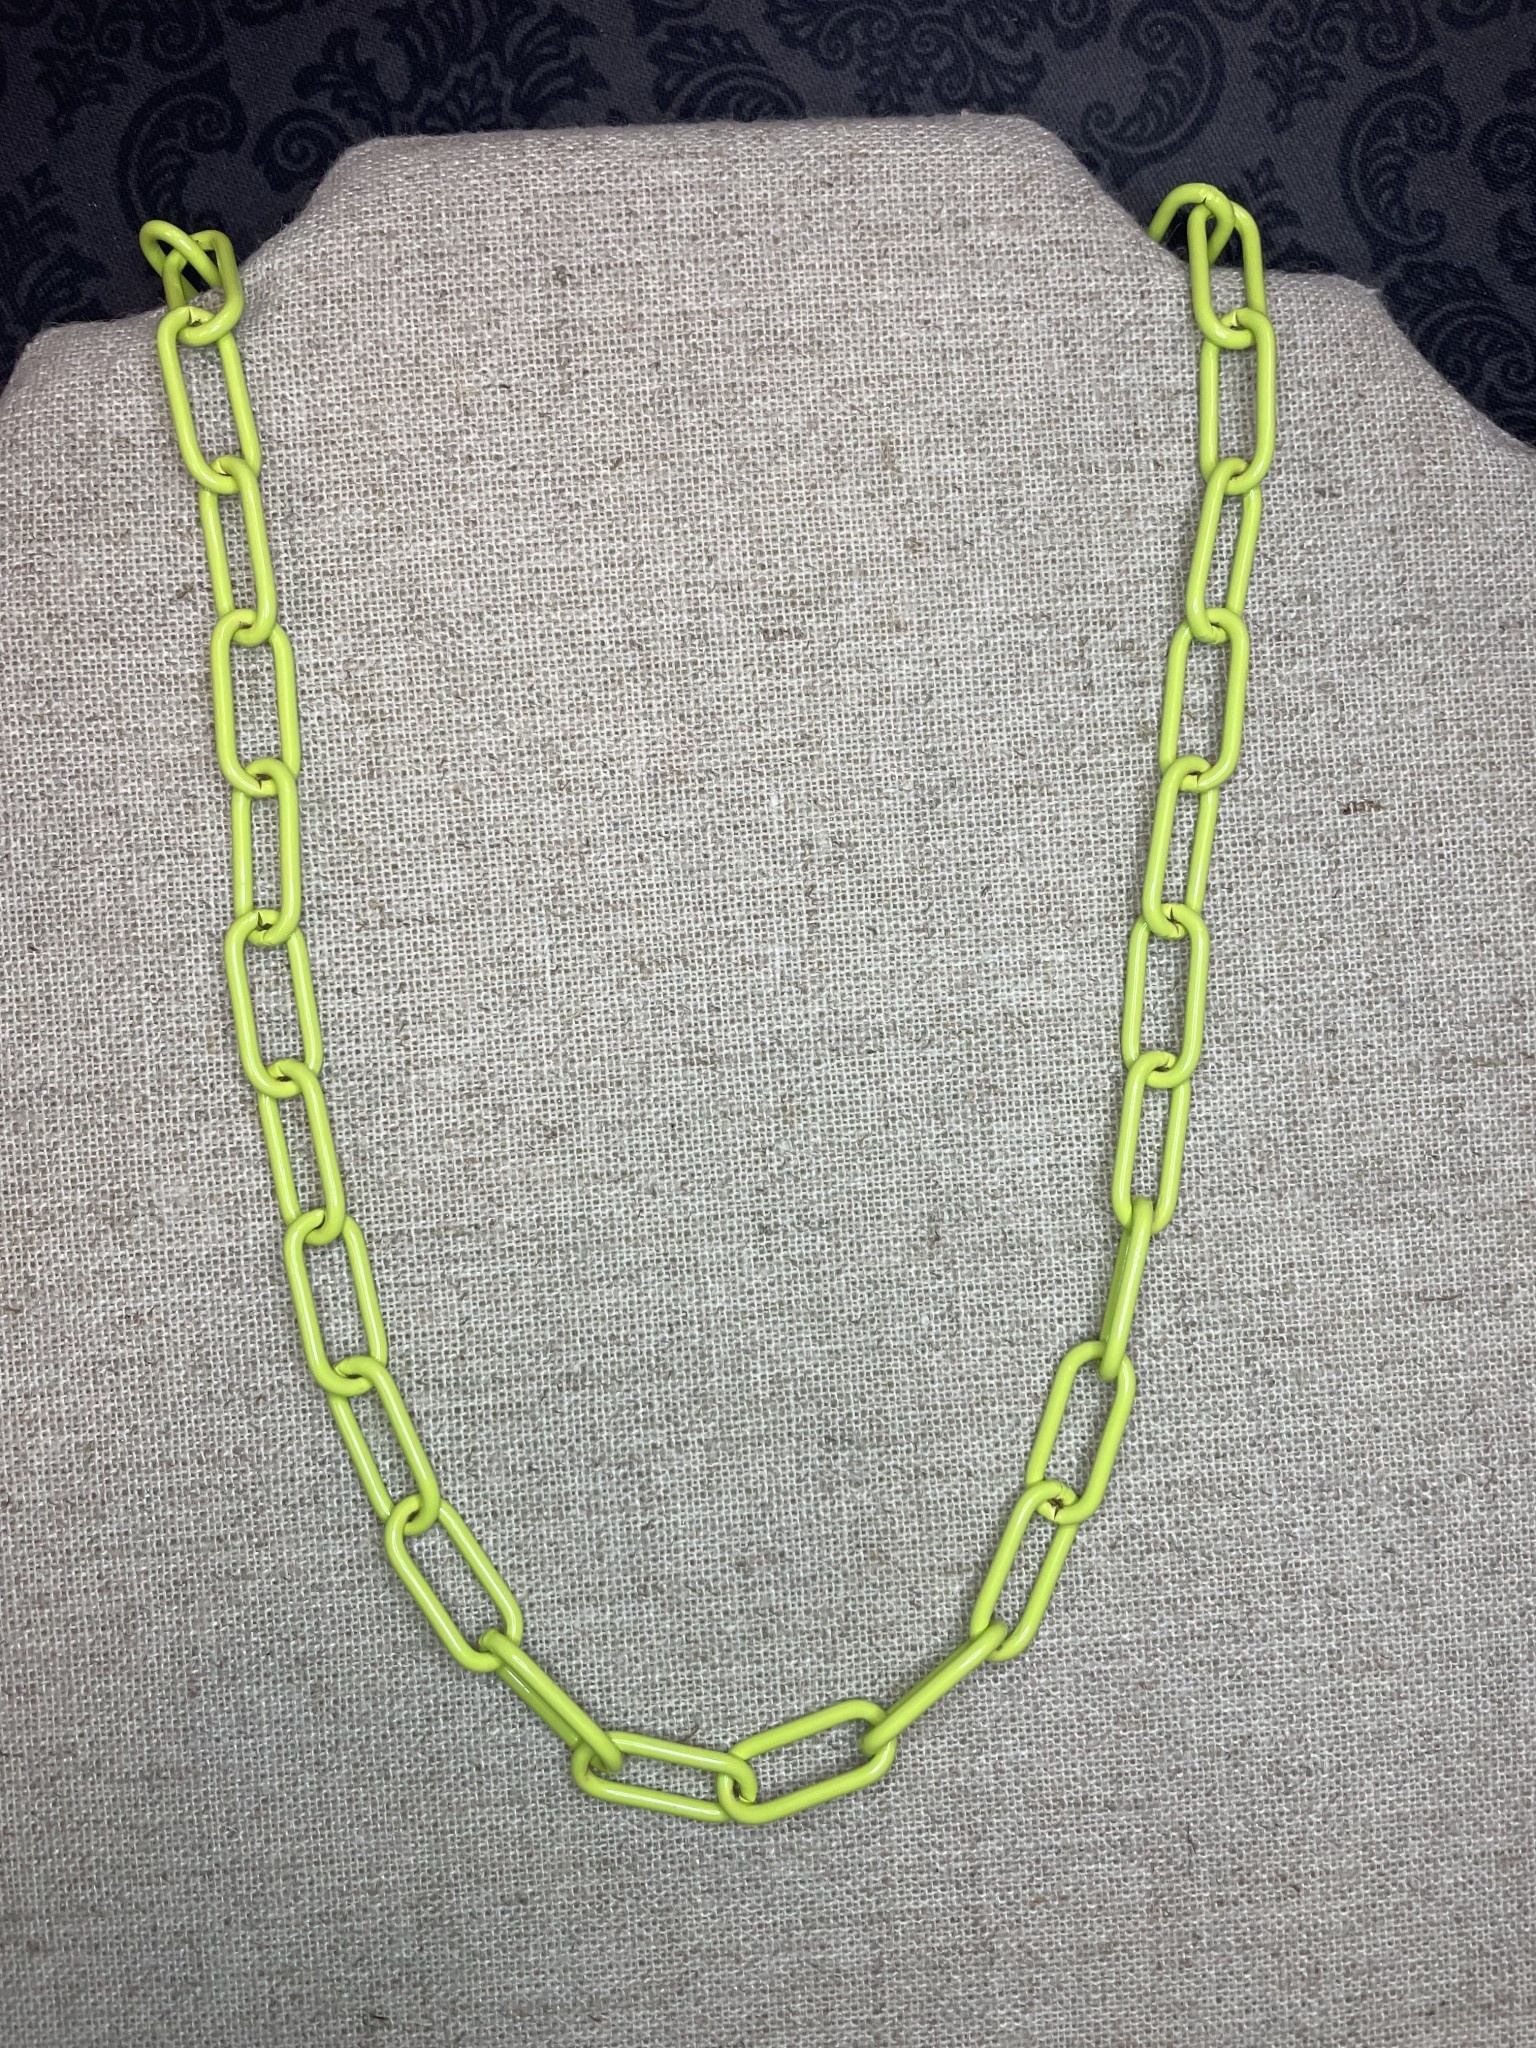 available at m. lynne designs Lime Paperclip Link Necklace